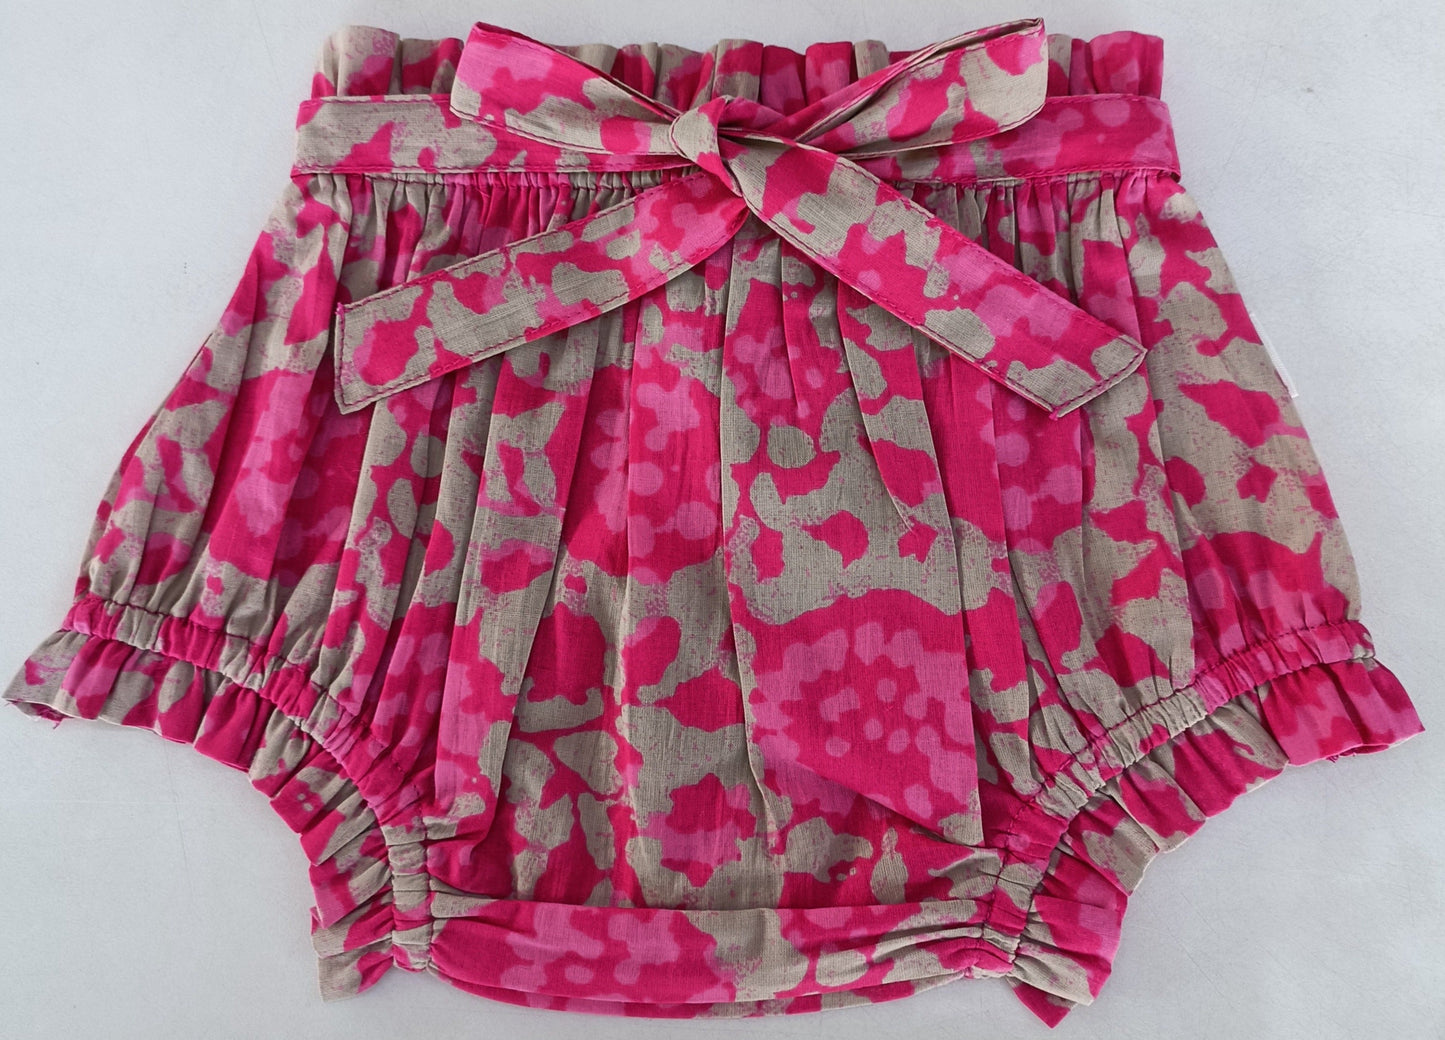 Hot-Pink Print Shorts-Style Diaper Cover